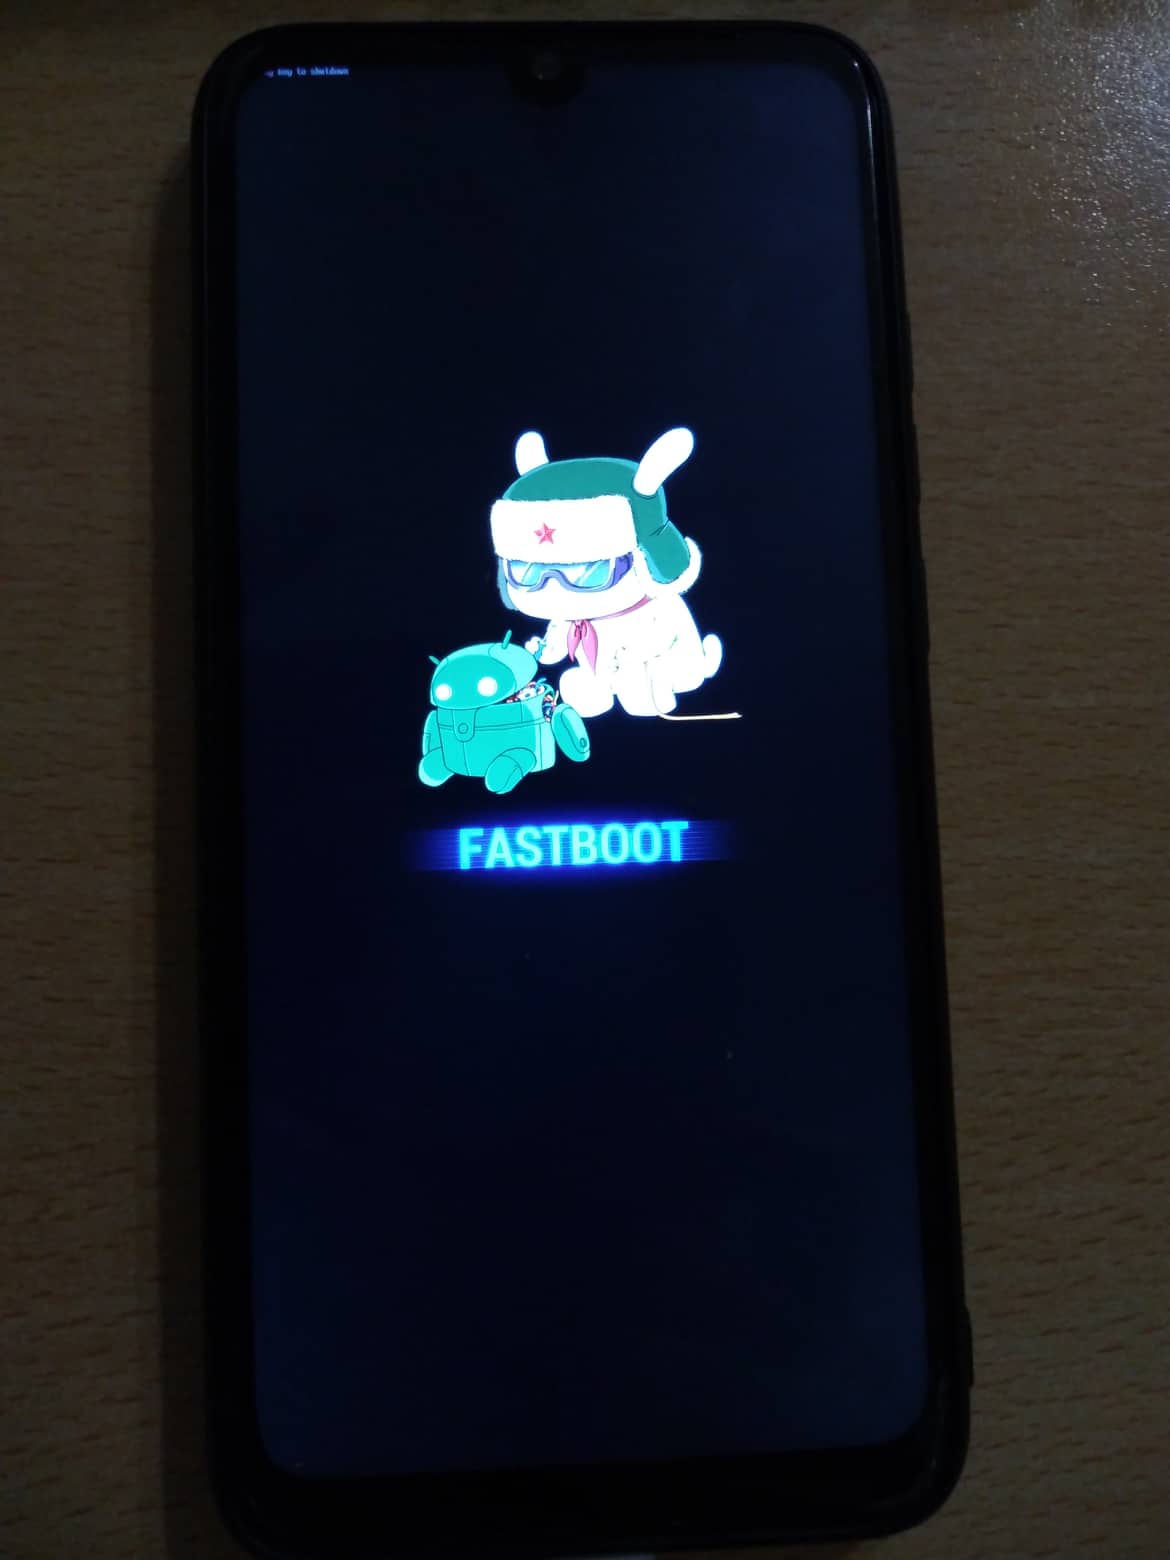 Redmi 7a System Has Been Destroyed